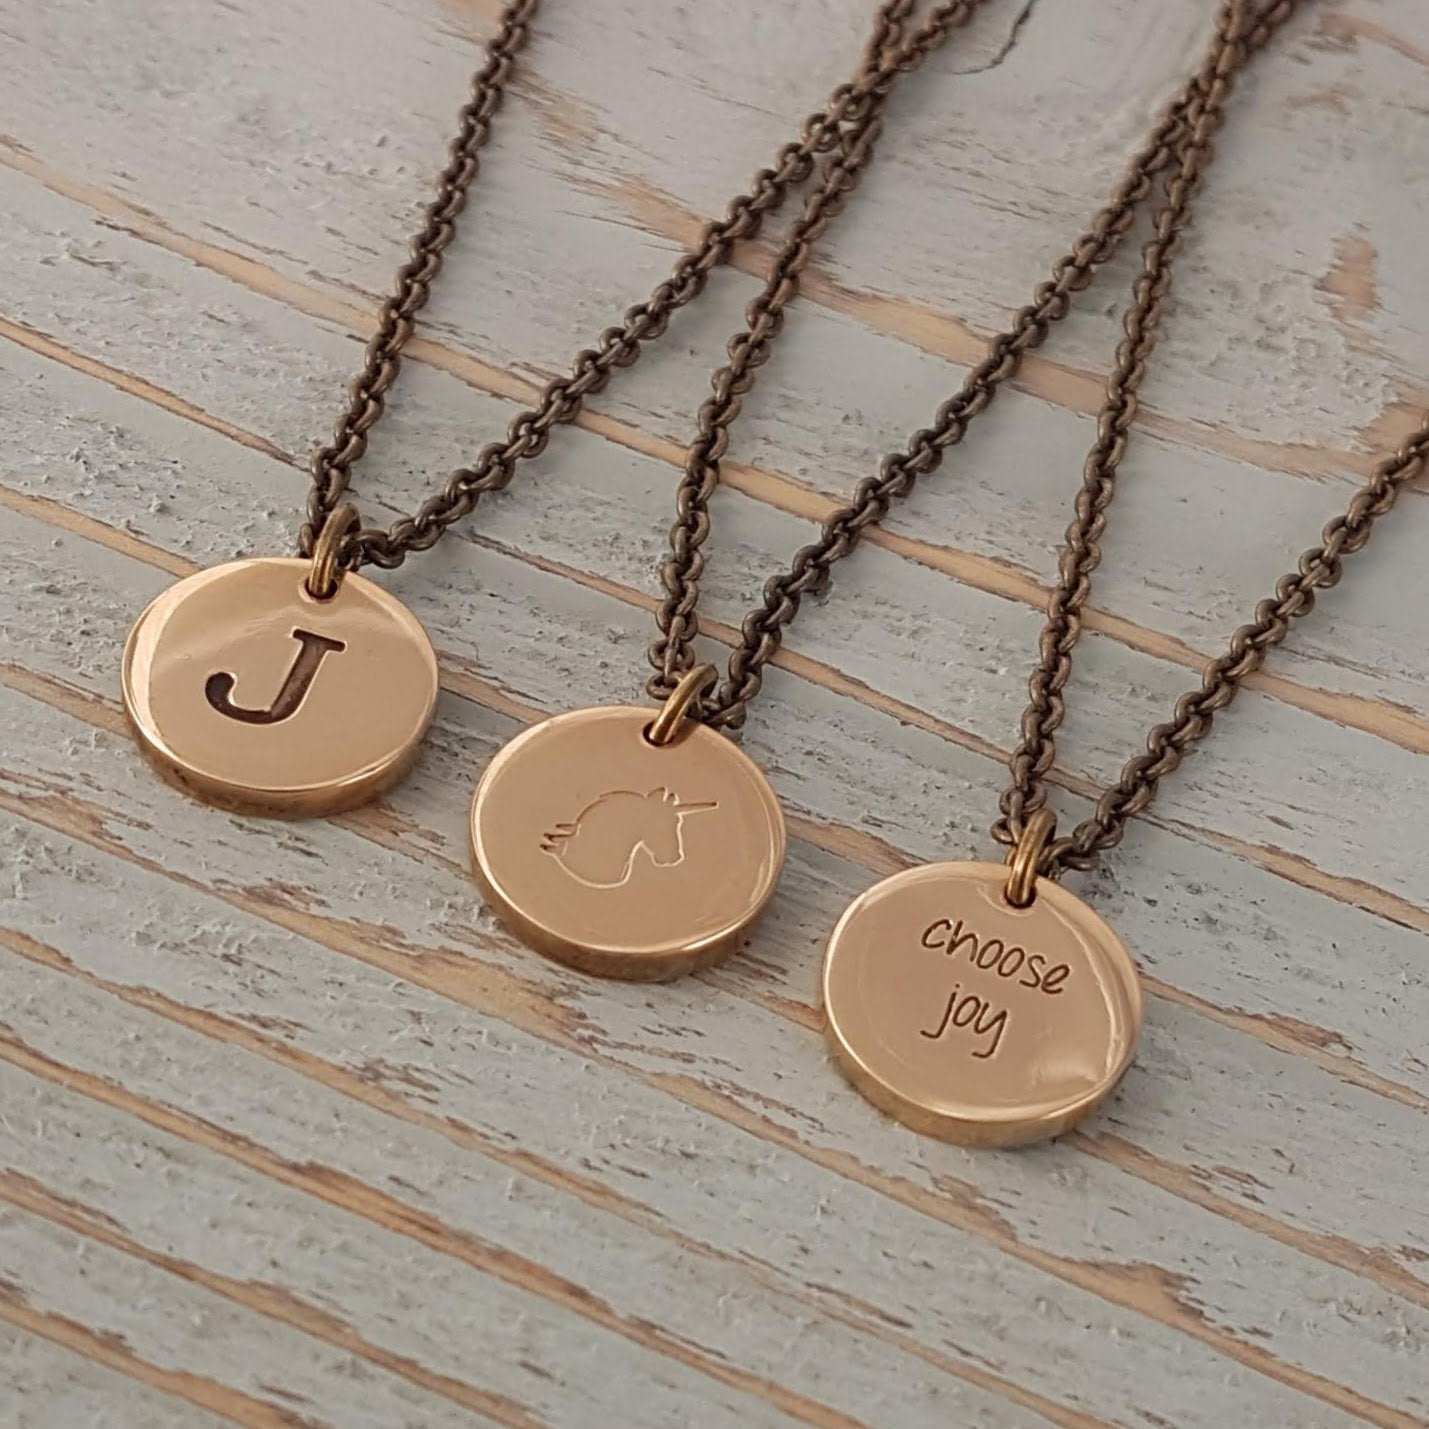 Custom Engraved Gold Pendant Necklace, Initials, Symbols, Names, Dates, Logo, Image, Fingerprint, Handwritting in any language - Gwen Delicious Jewelry Designs